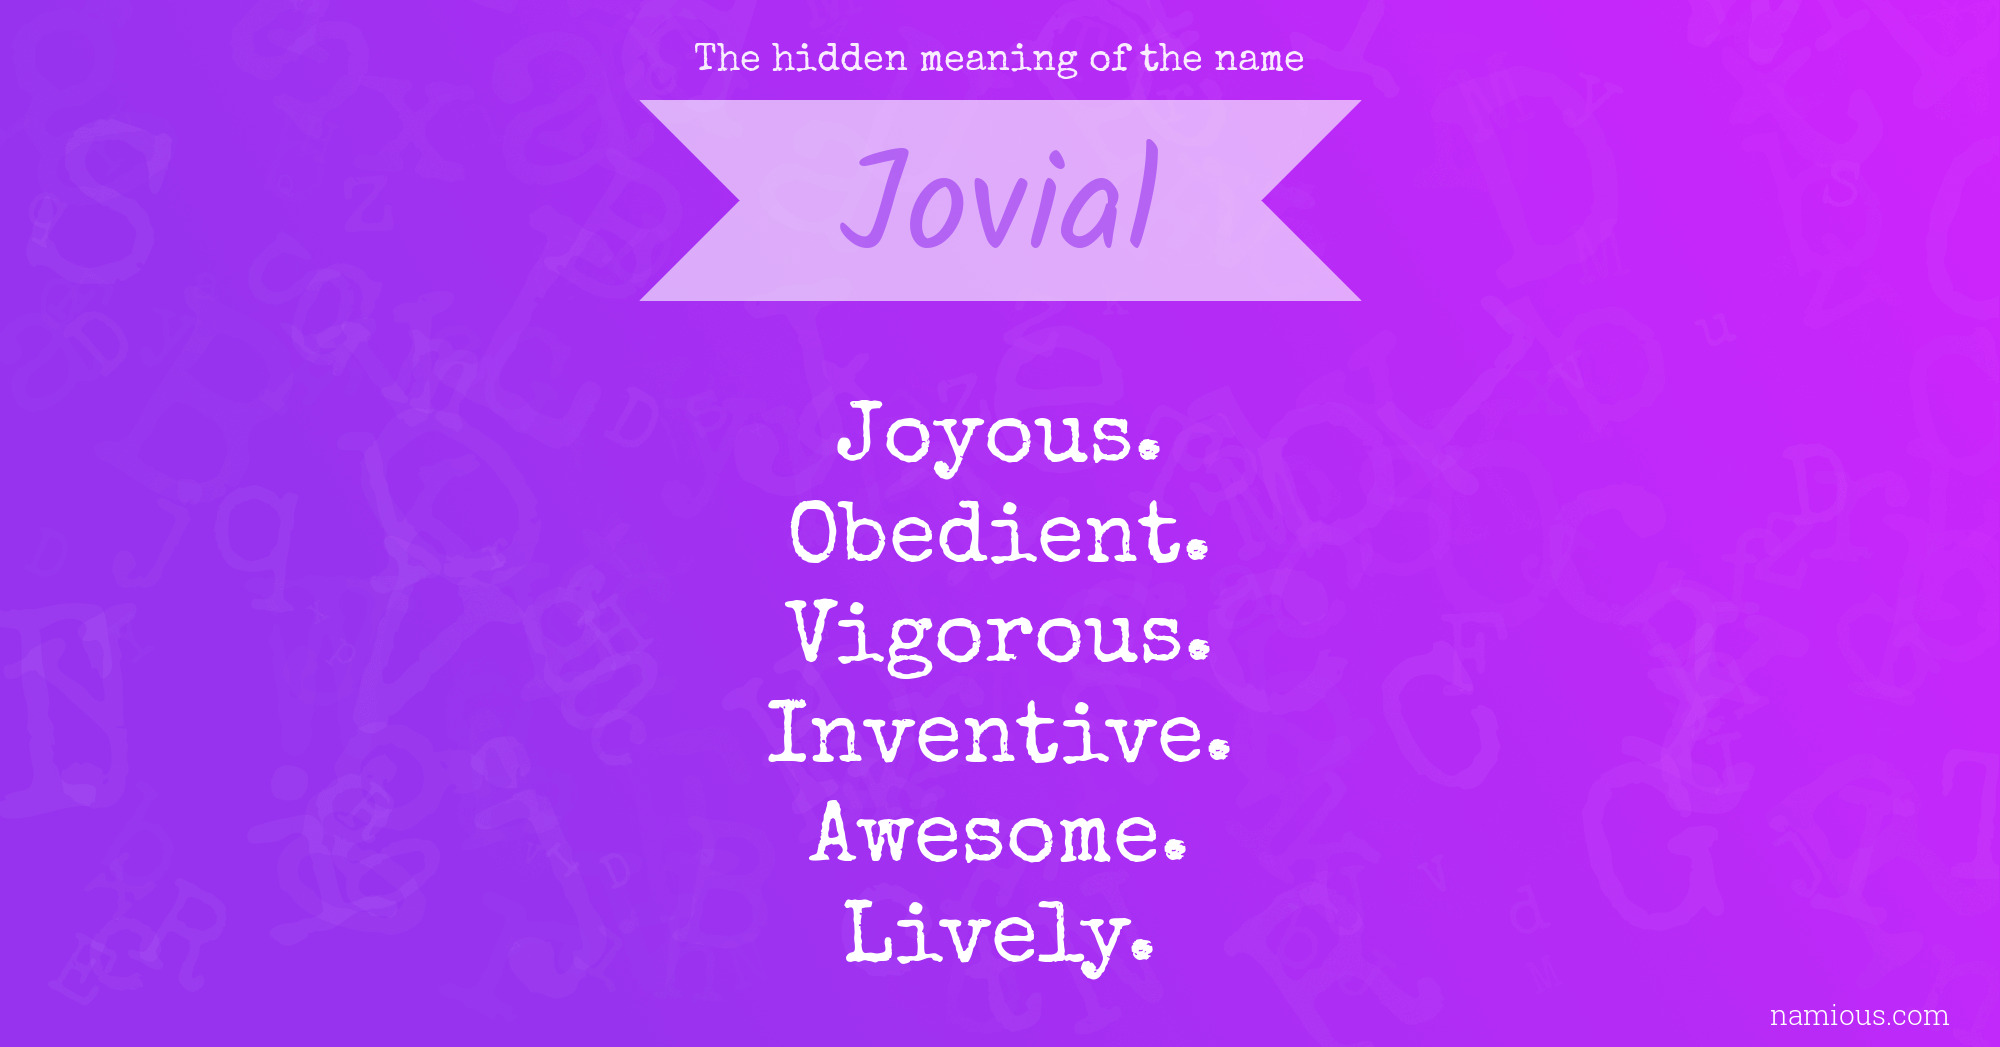 The hidden meaning of the name Jovial